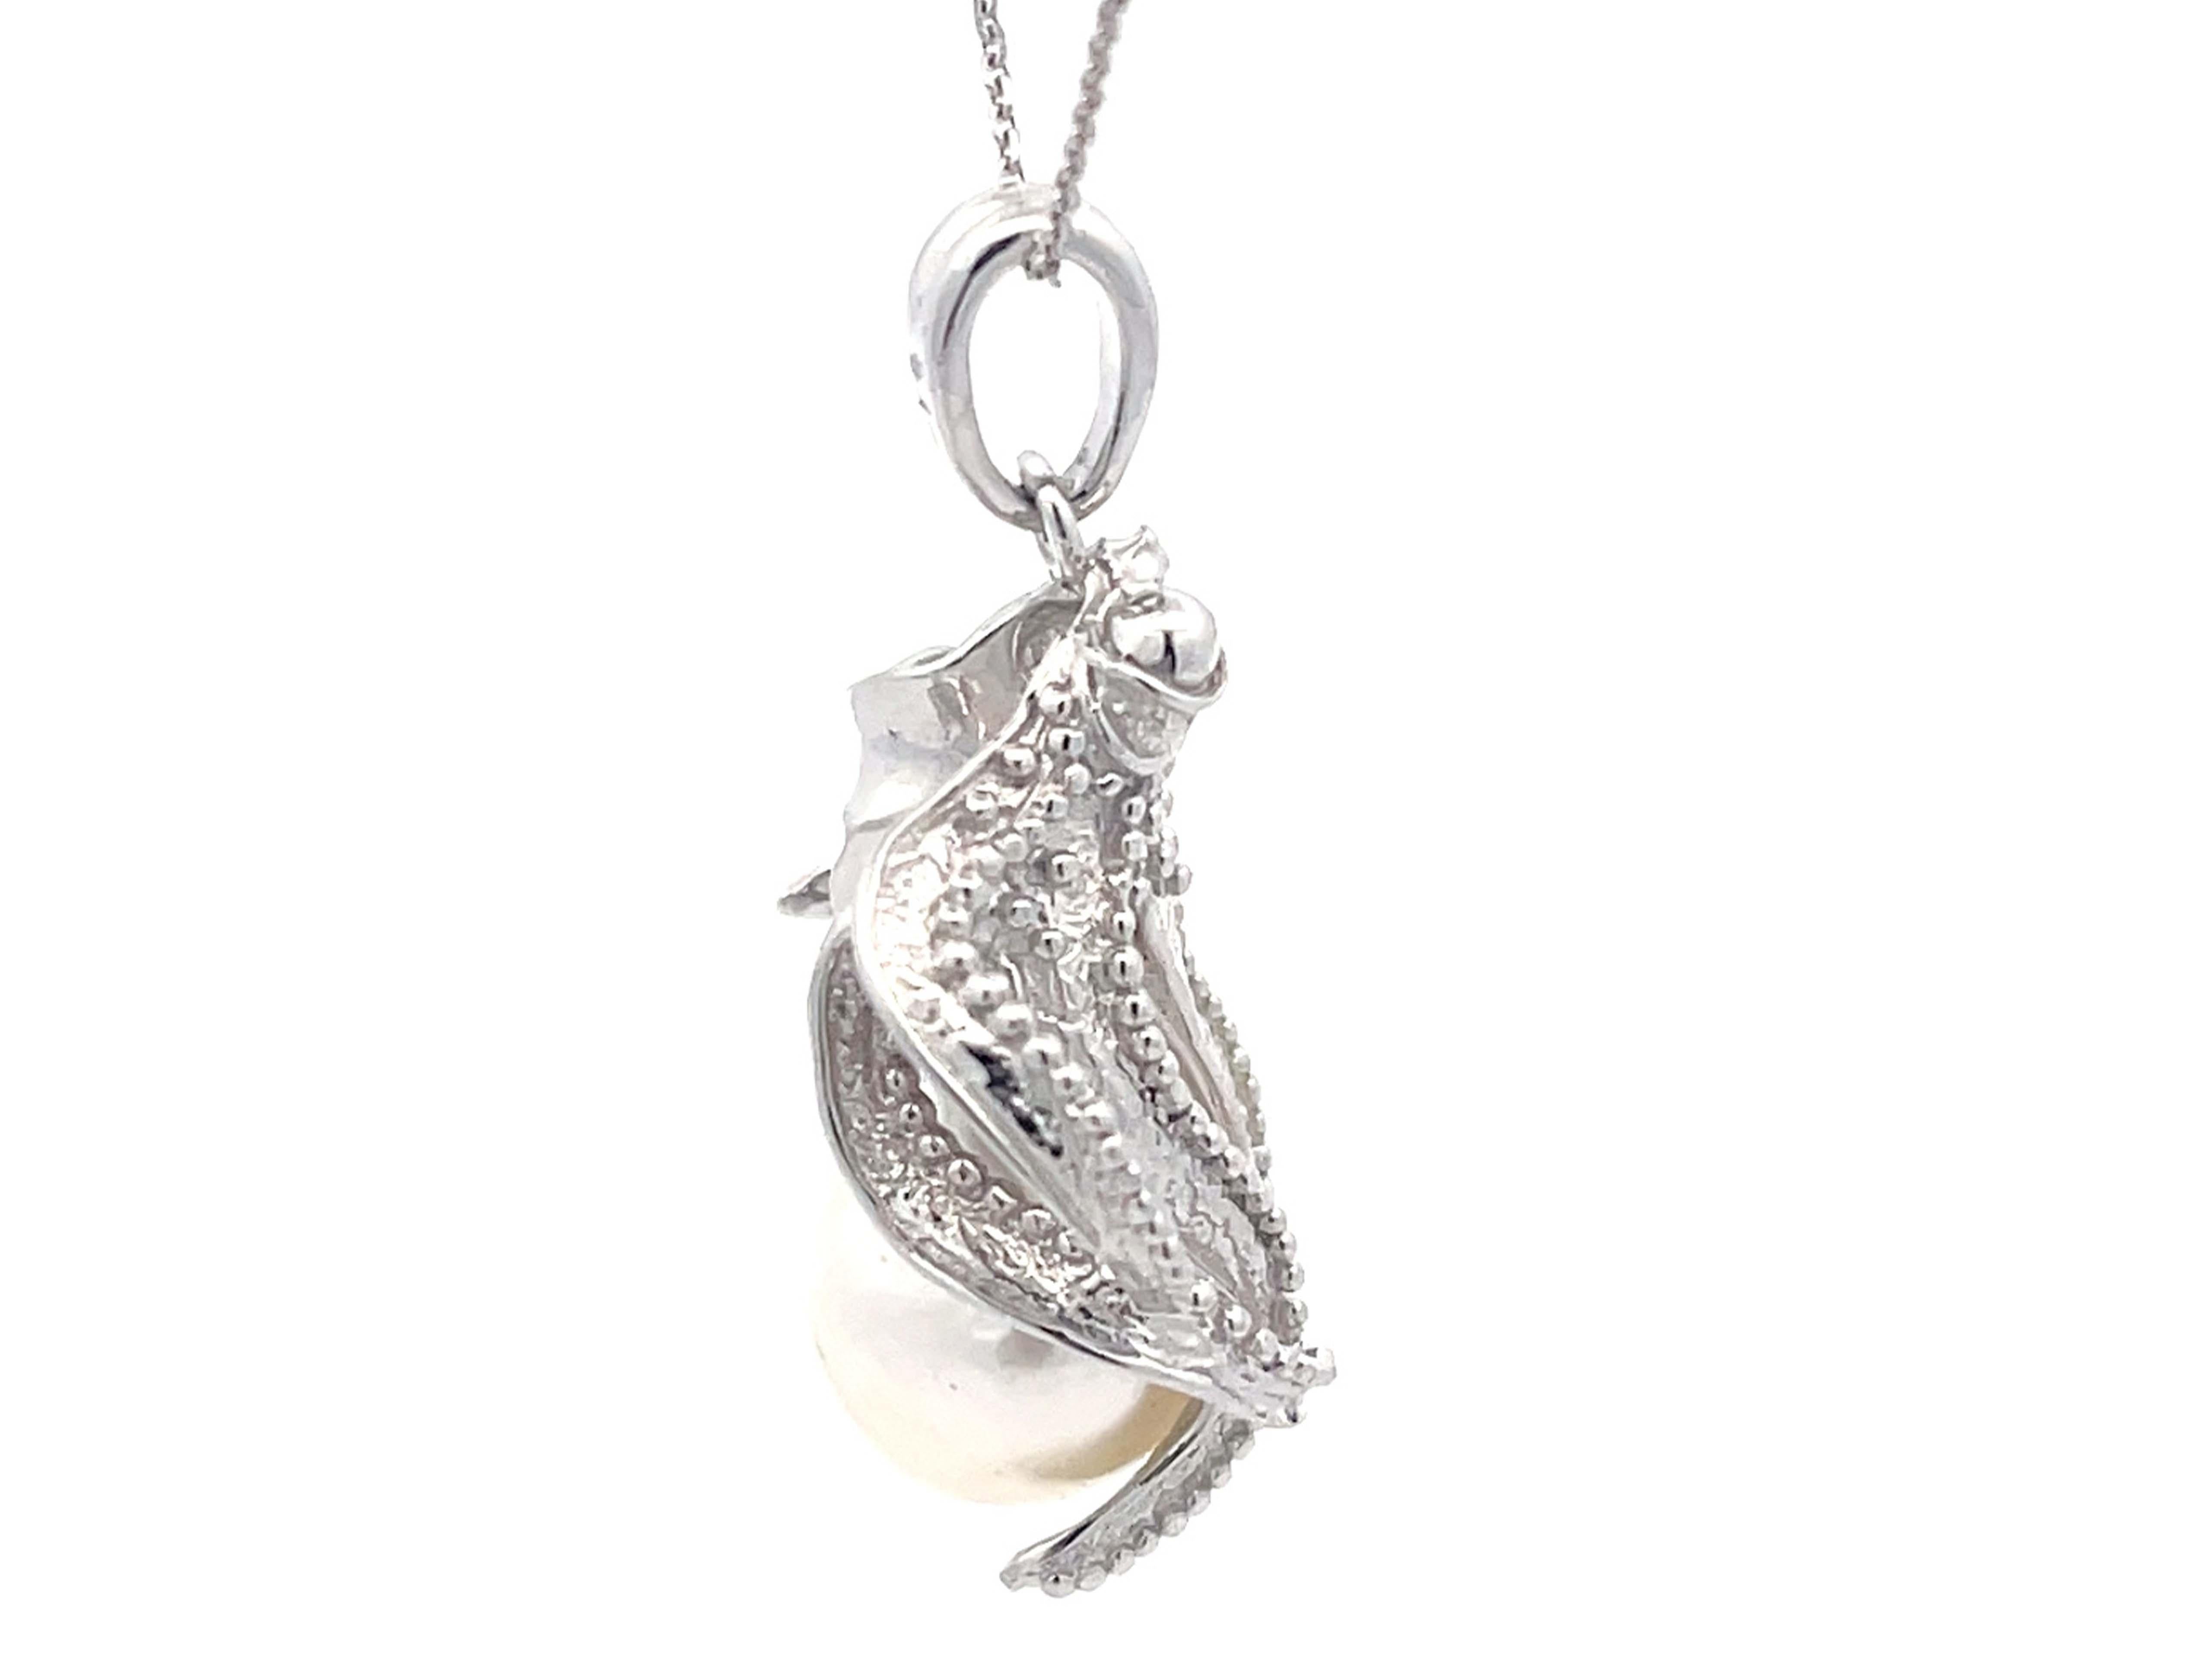 Assor Gioielli Octopus Baroque Pearl Pendant on Chain in 18k White Gold In Excellent Condition For Sale In Honolulu, HI